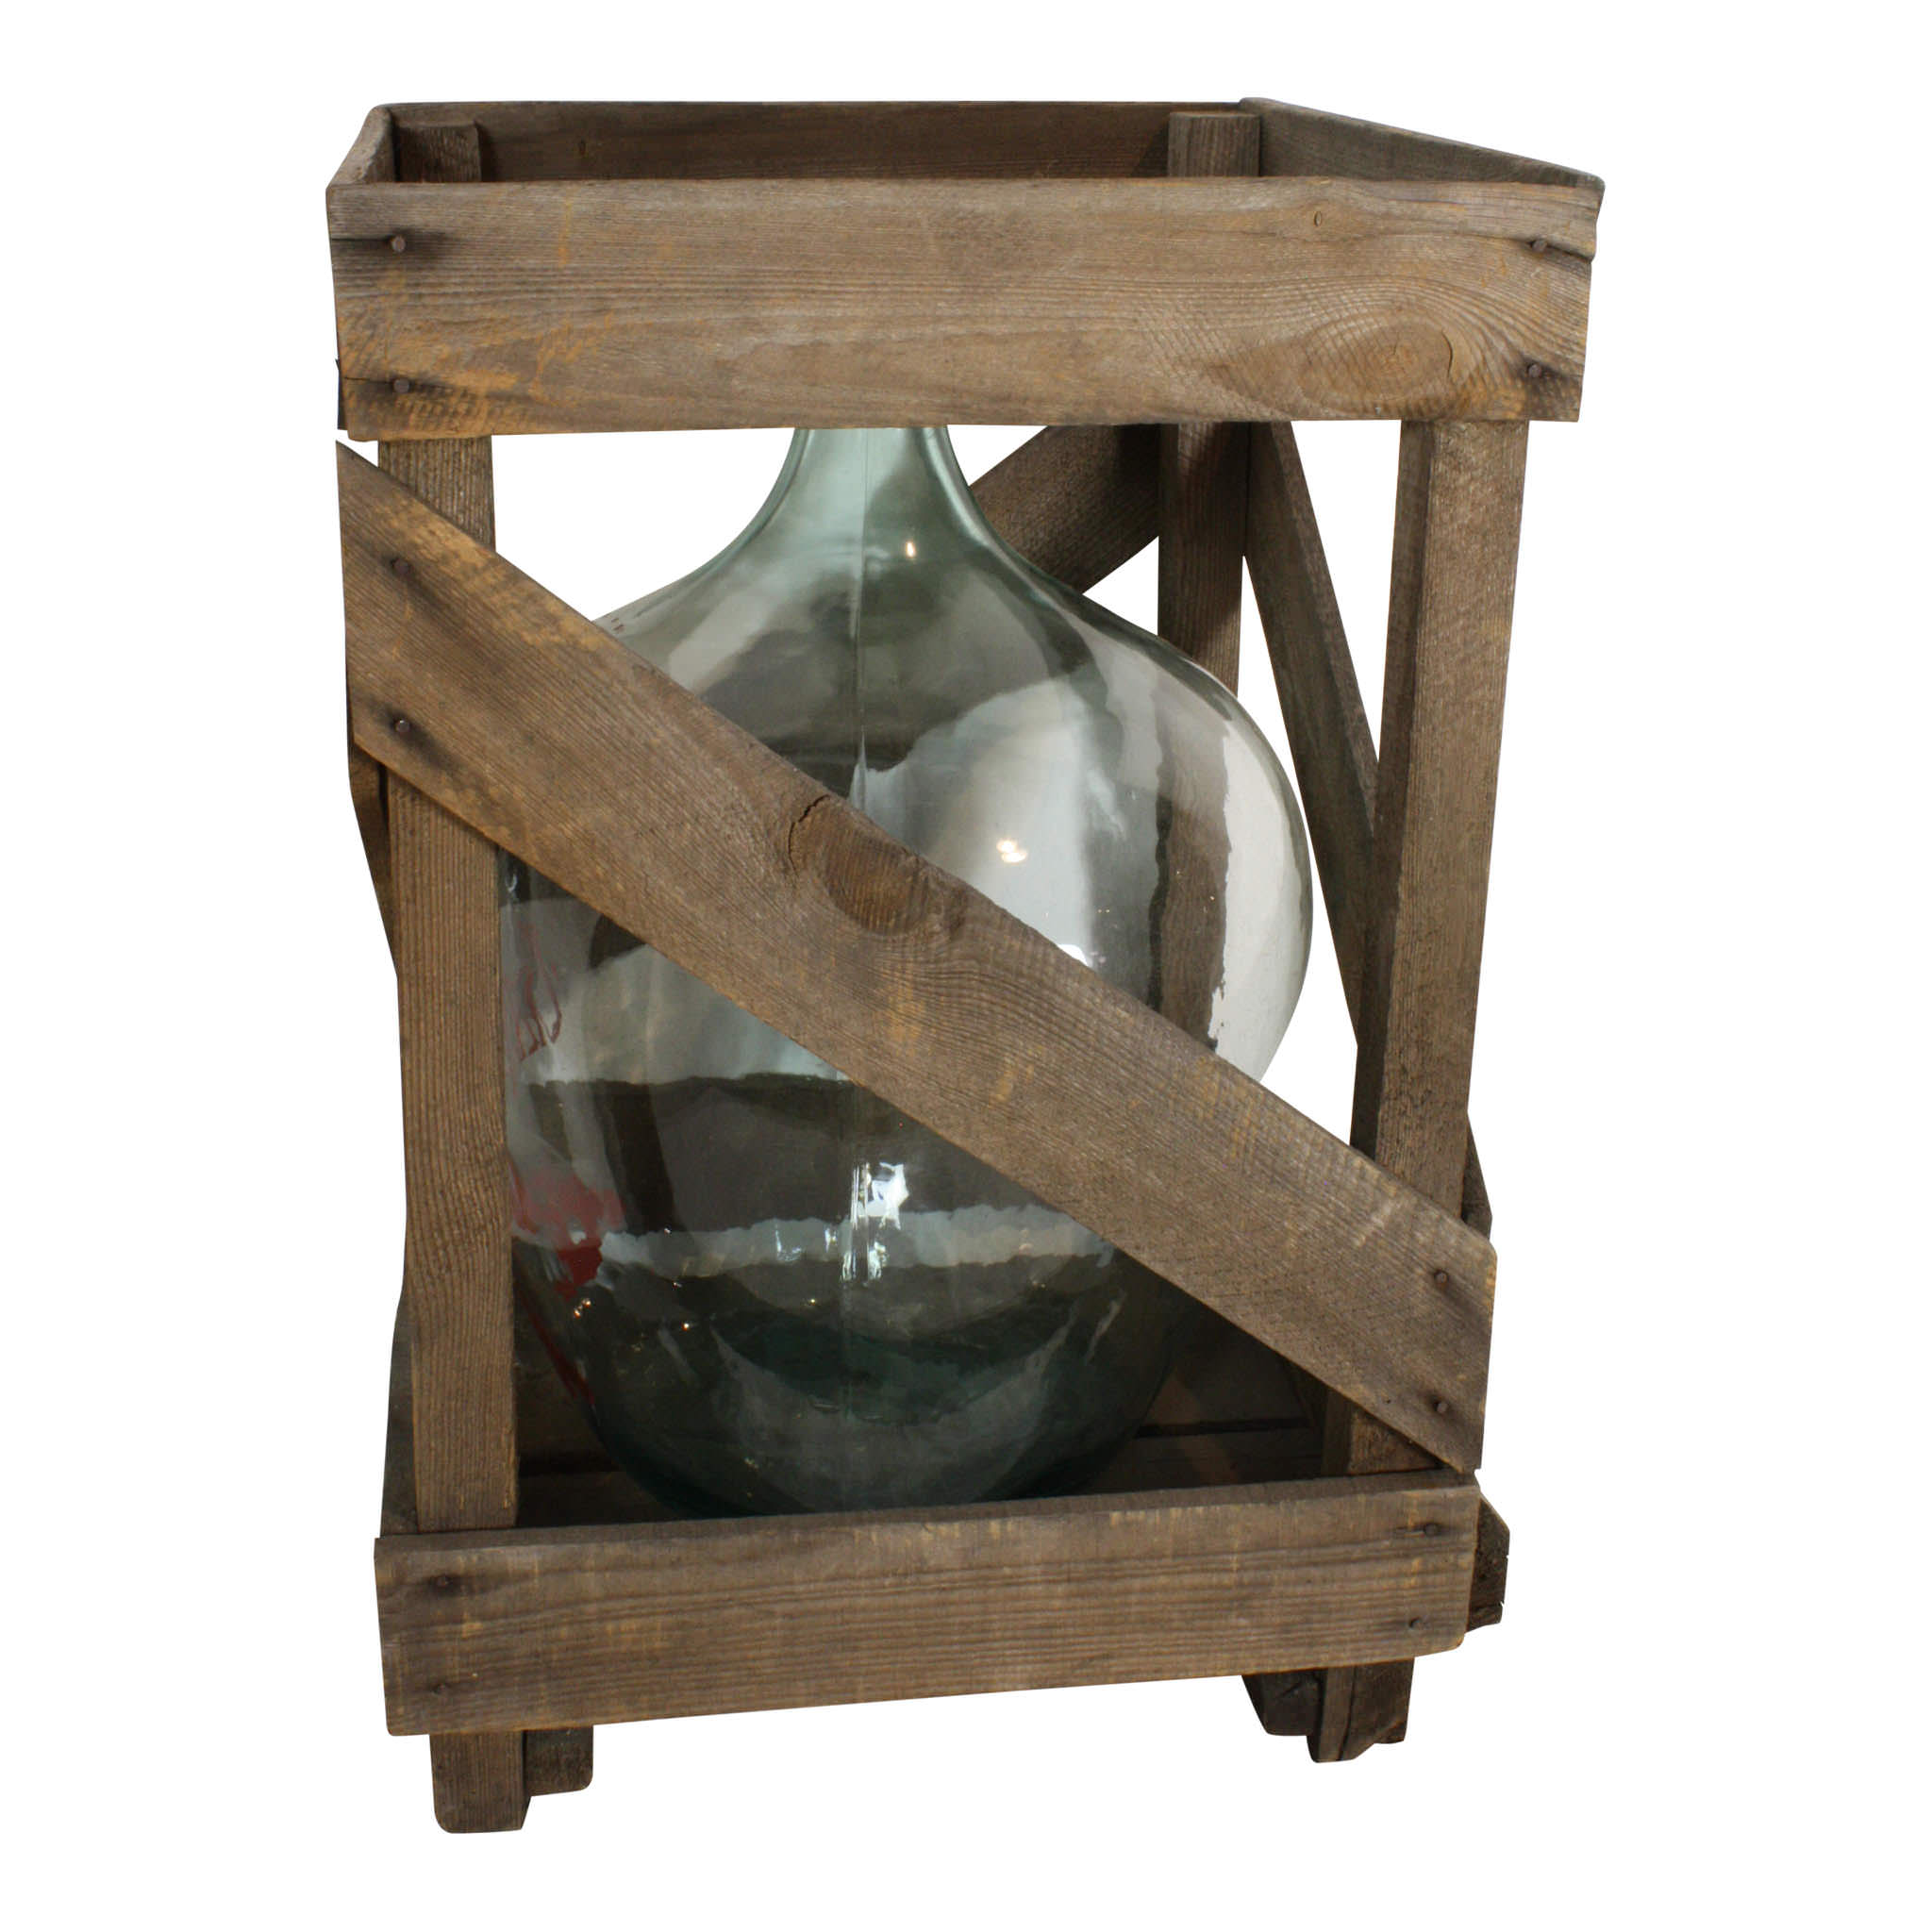 Painted Cabernet Sauvignon Demijohn in Wood Crate